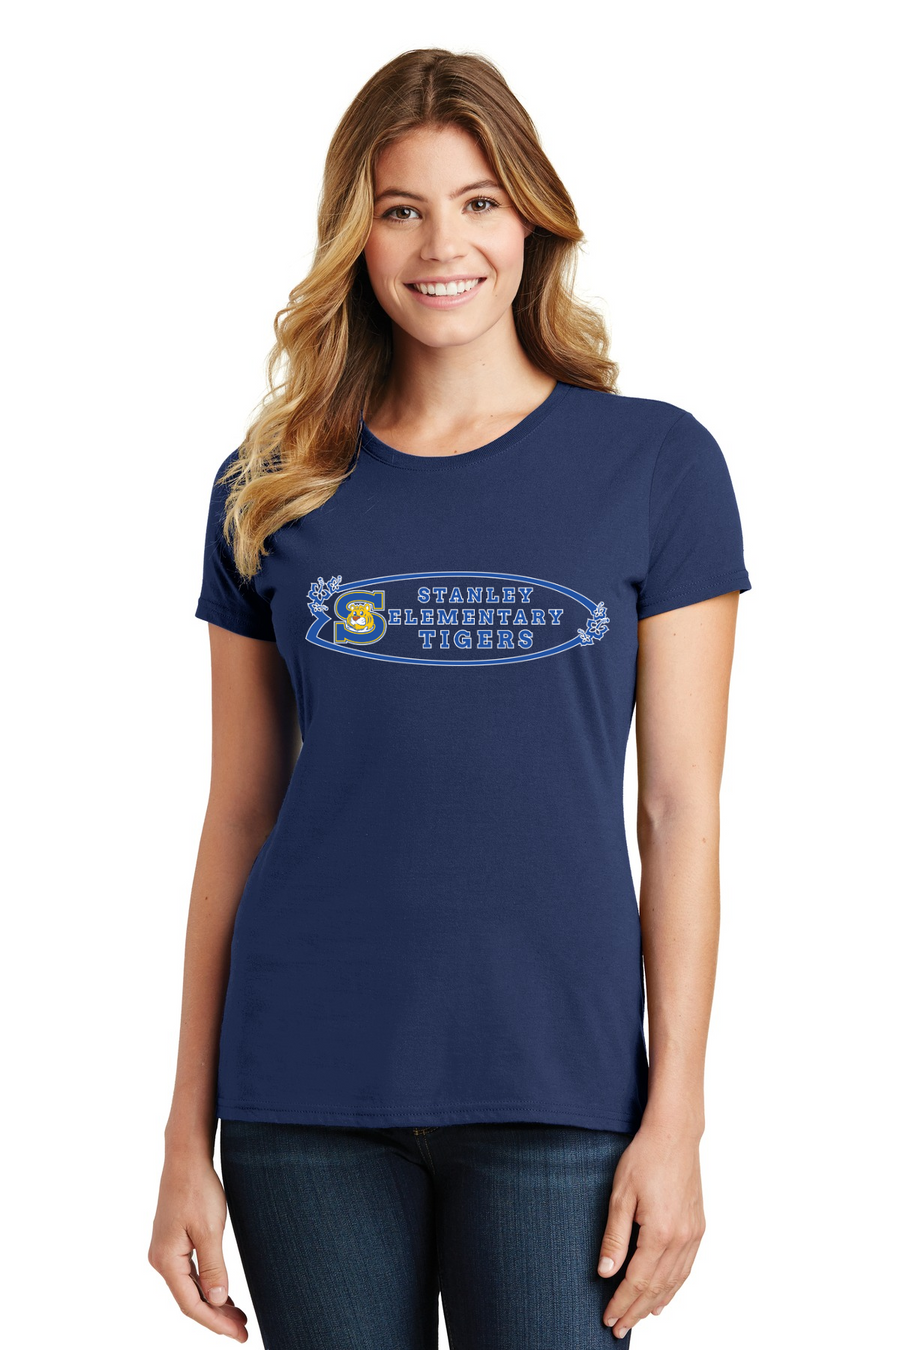 The Tiger Store - Stanley Elementary 2023/24-Port and Co Ladies Favorite Shirt Surf Board Logo